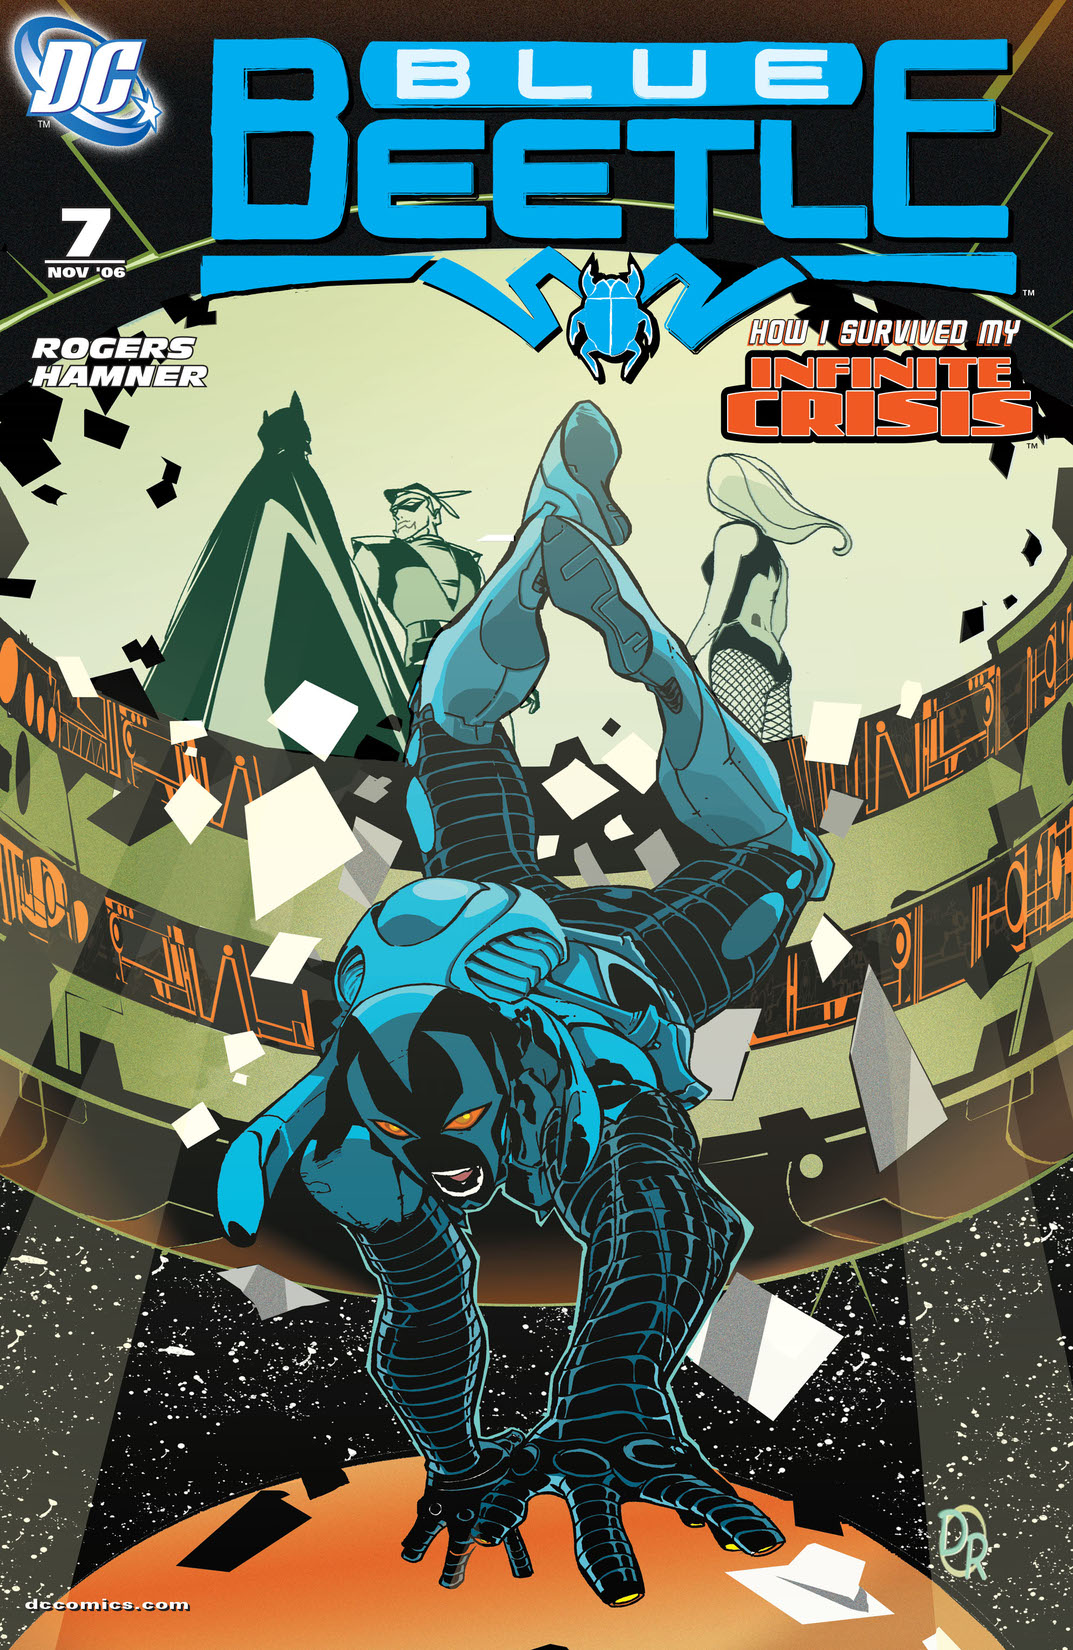 Blue Beetle (2006-) #7 preview images